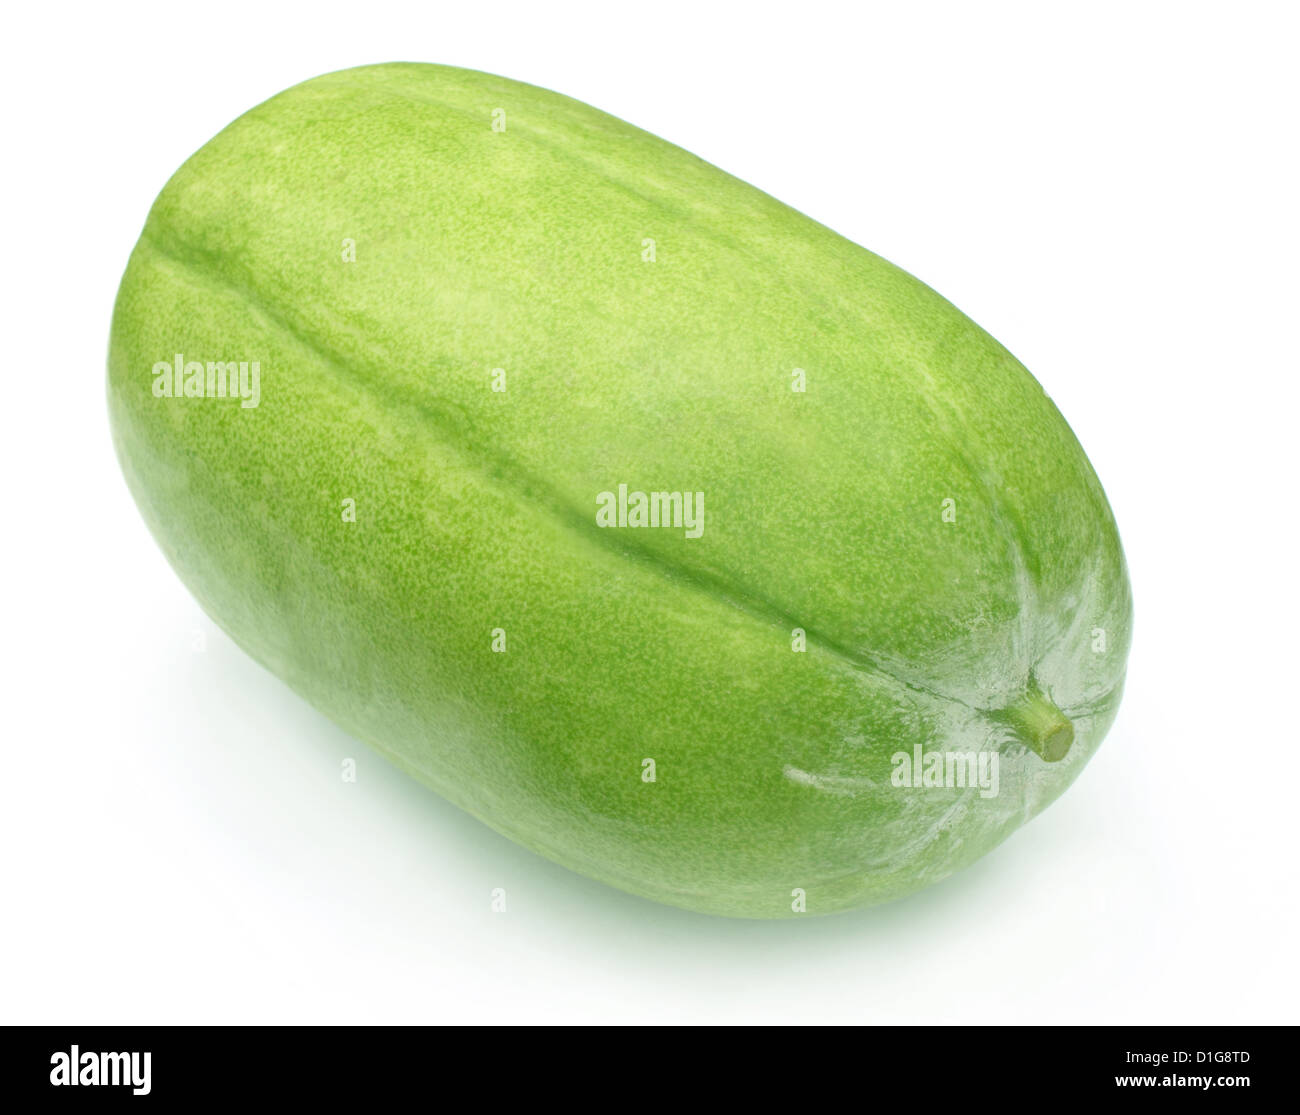 Wax gourd or Chalkumra of Indian subcontinent Stock Photo